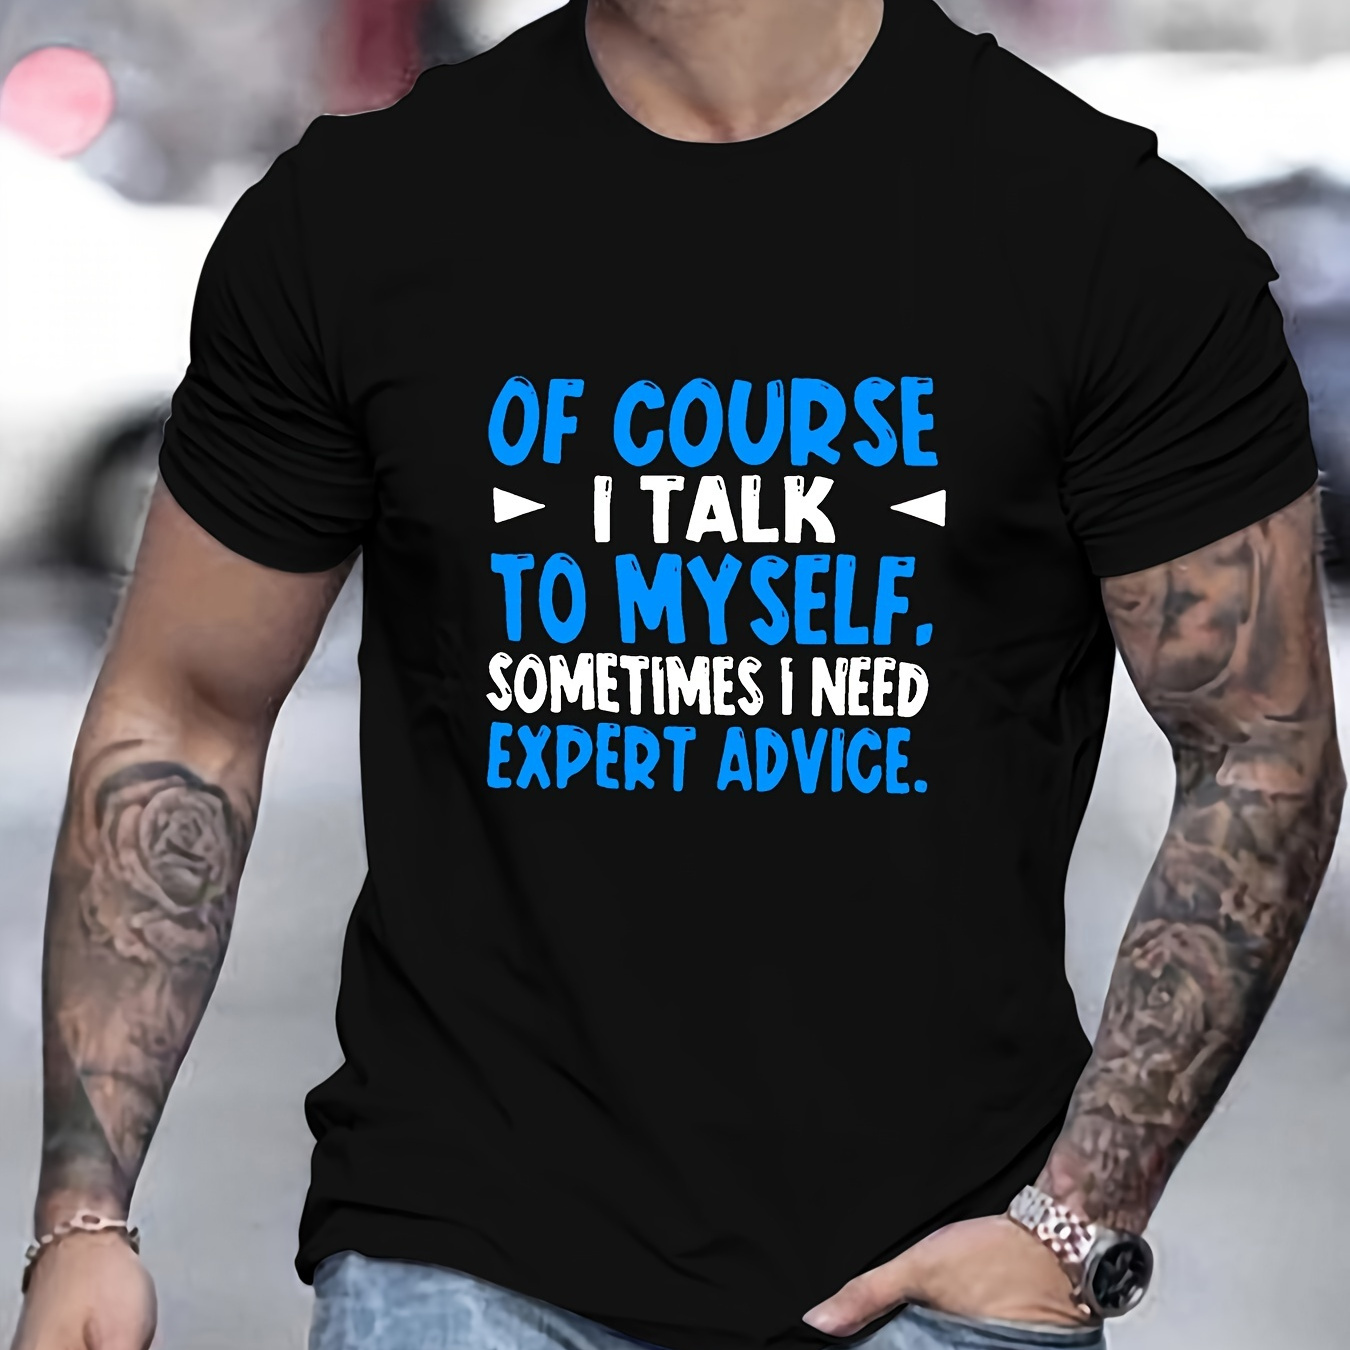 

Funny 'i Need Expert Advice' Print Tee Shirt, Tee For Men, Casual T-shirt For Summer Spring Fall, Tops As Gifts